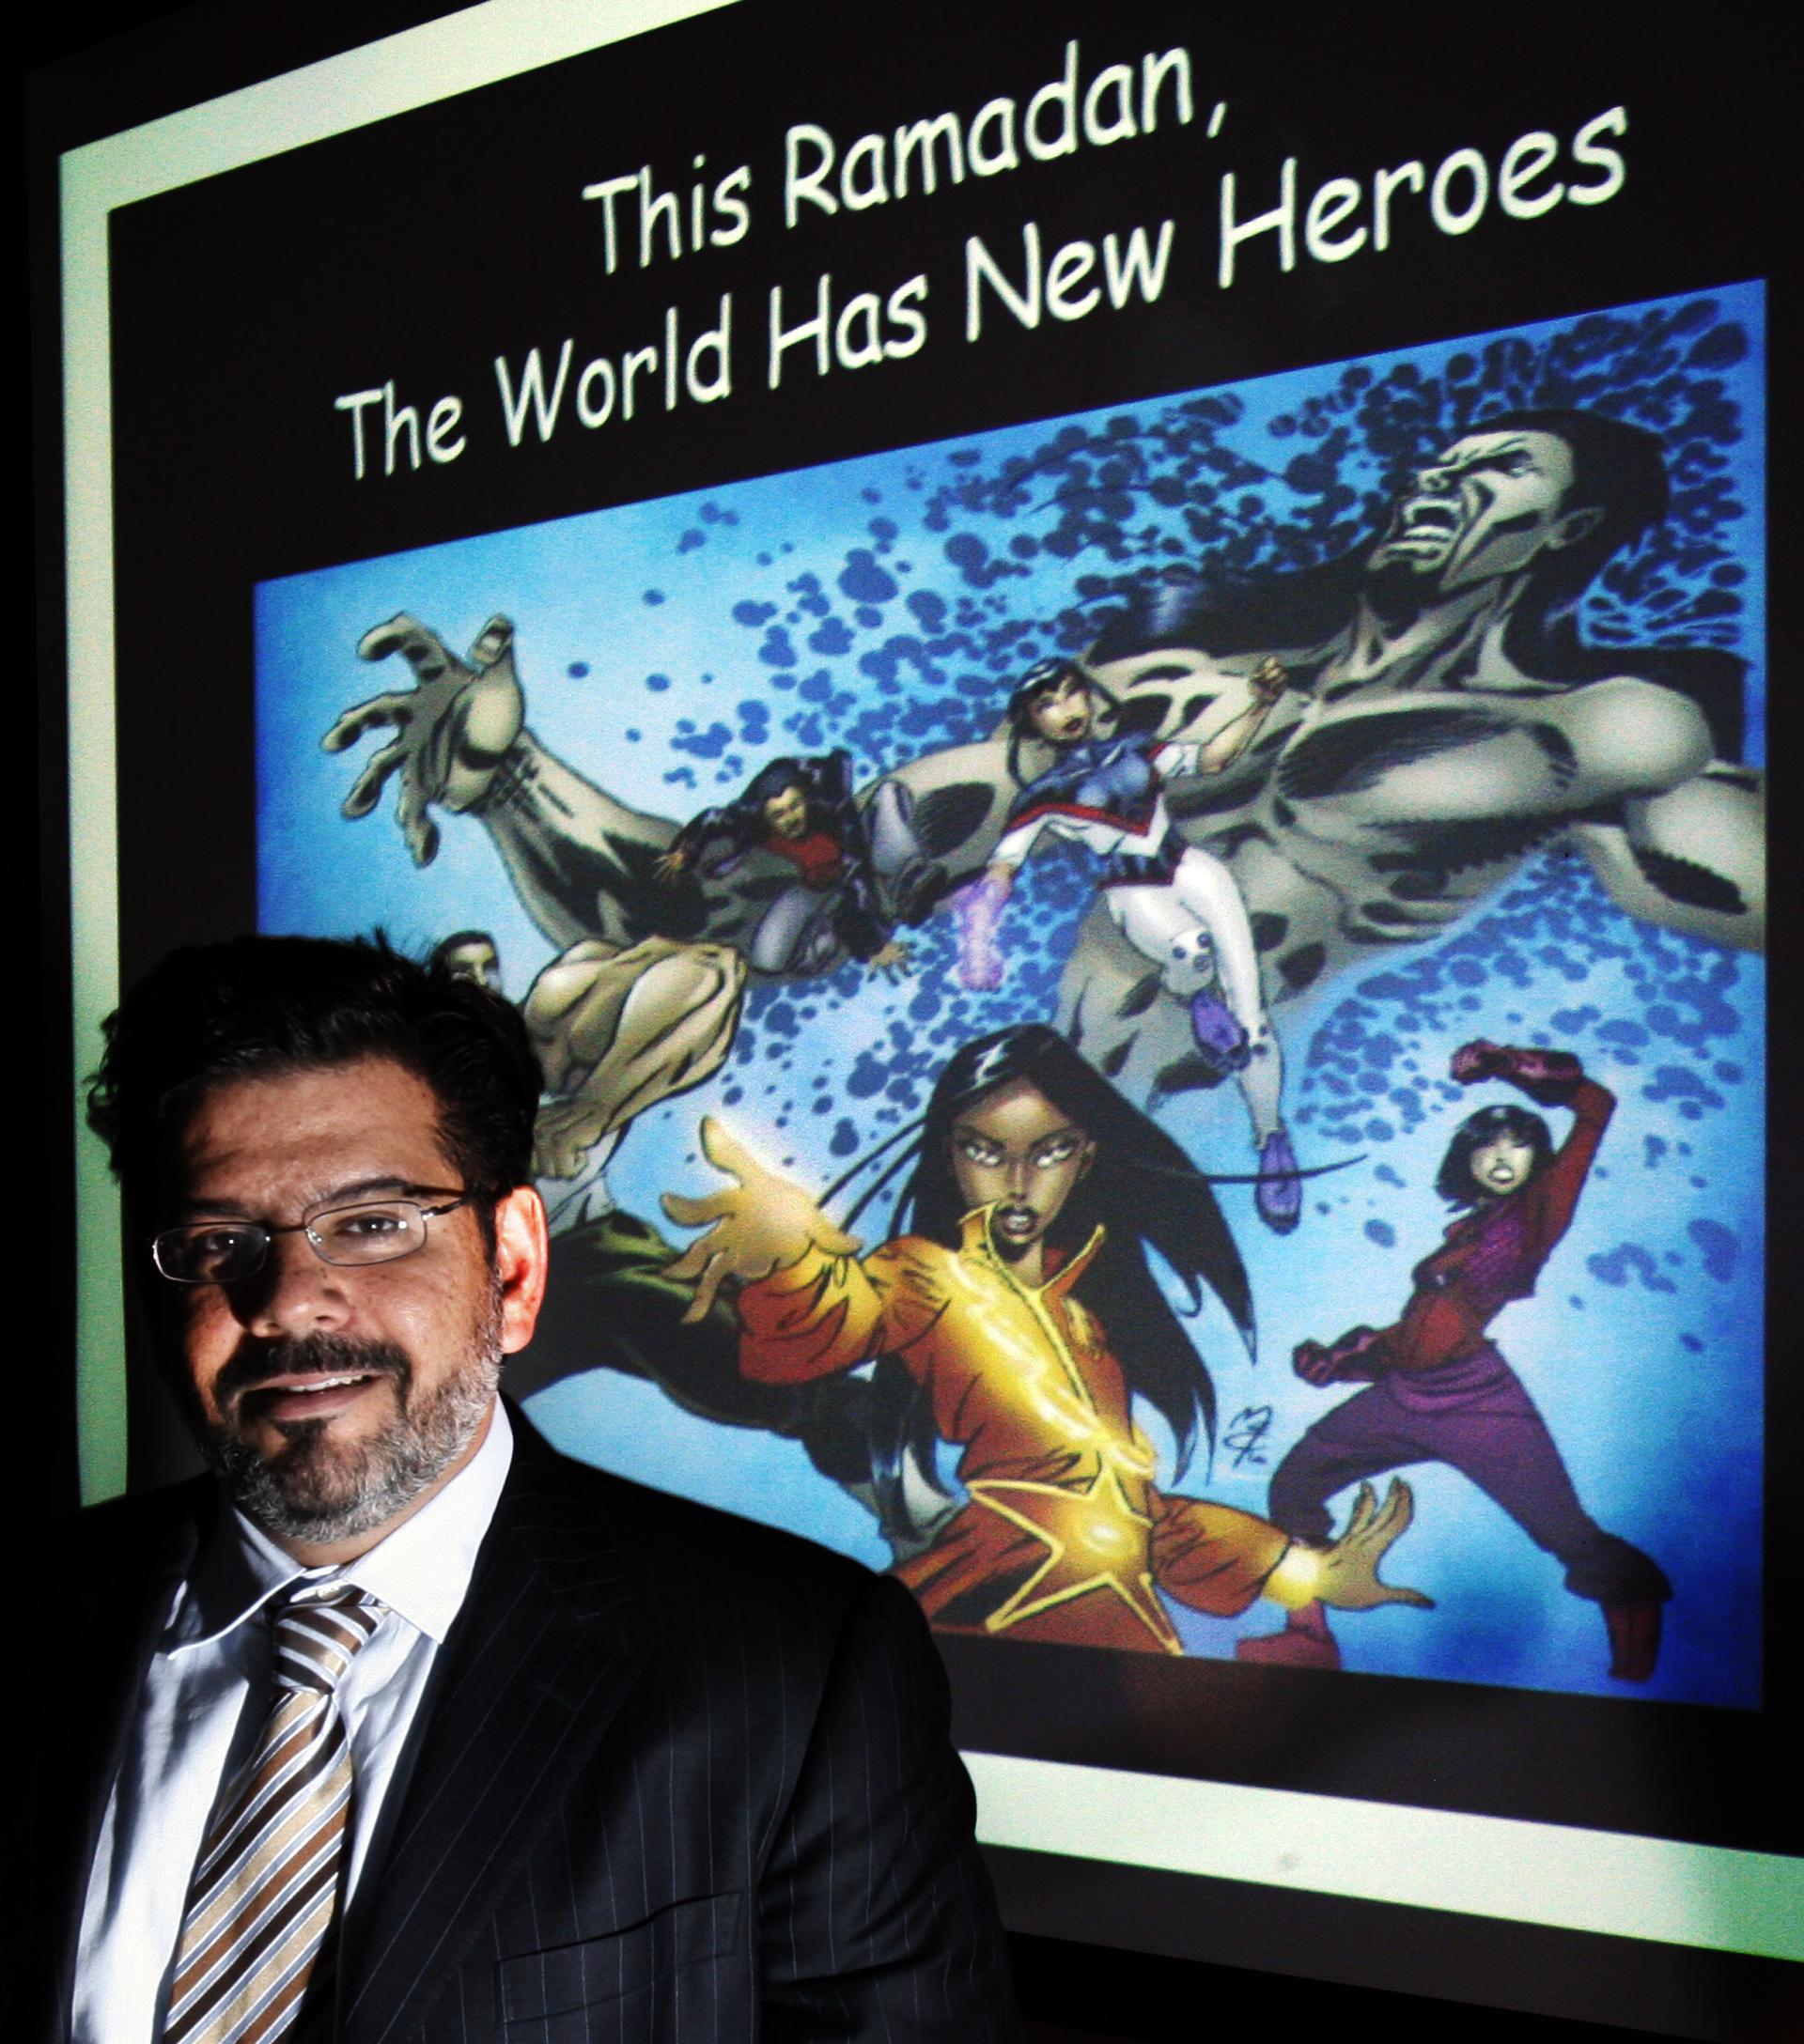 Kuwaiti psychologist Naif Al-Mutawa poses in front of cartoon characters he created for his comic book and television series "The 99'. The comic book series features cartoon superheroes for Muslim readers that incorporate Muslim values but now Saudi relig